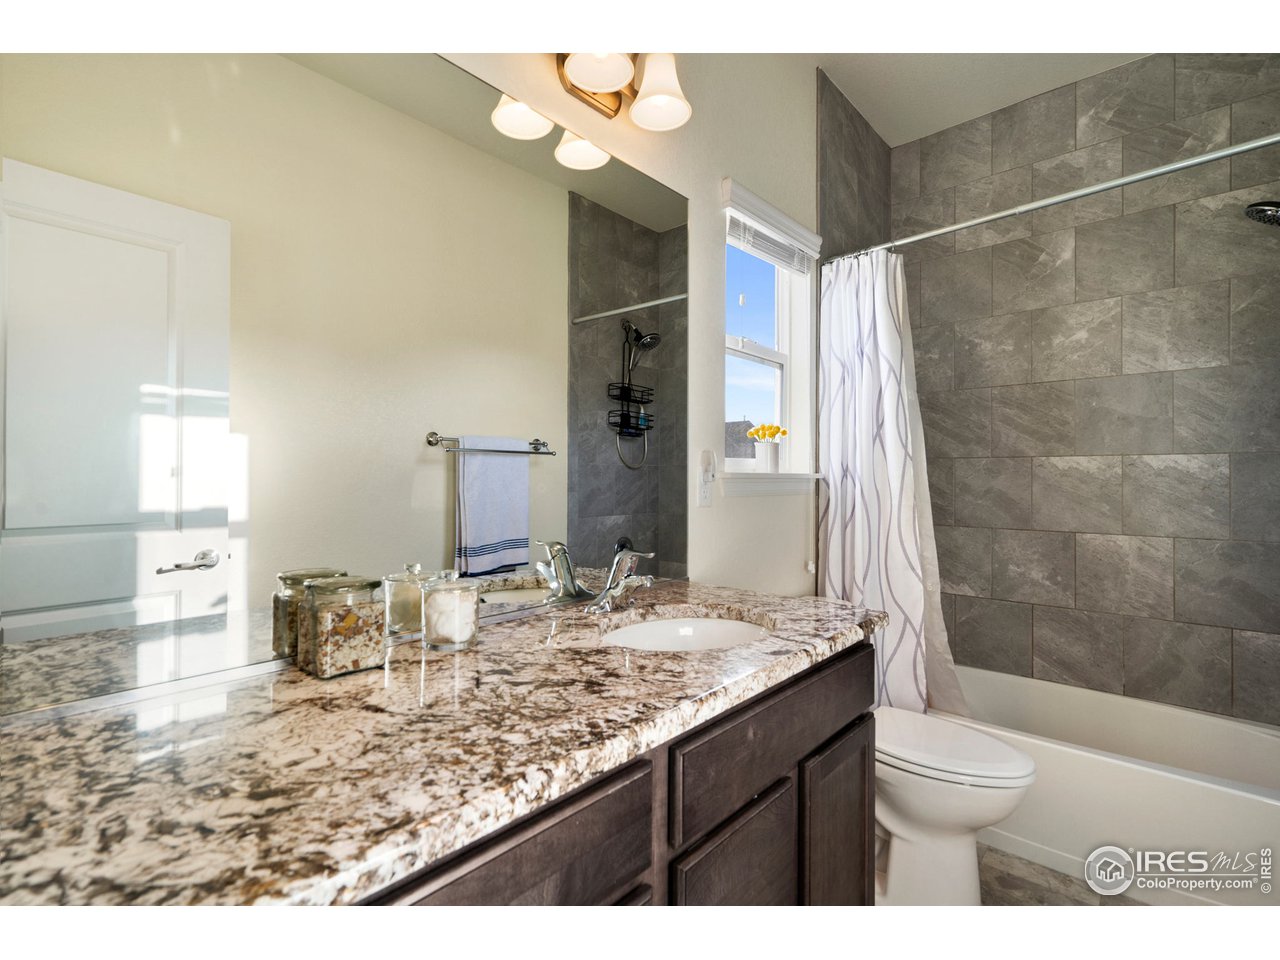 Owner's Bath with Tile and Granite Counters